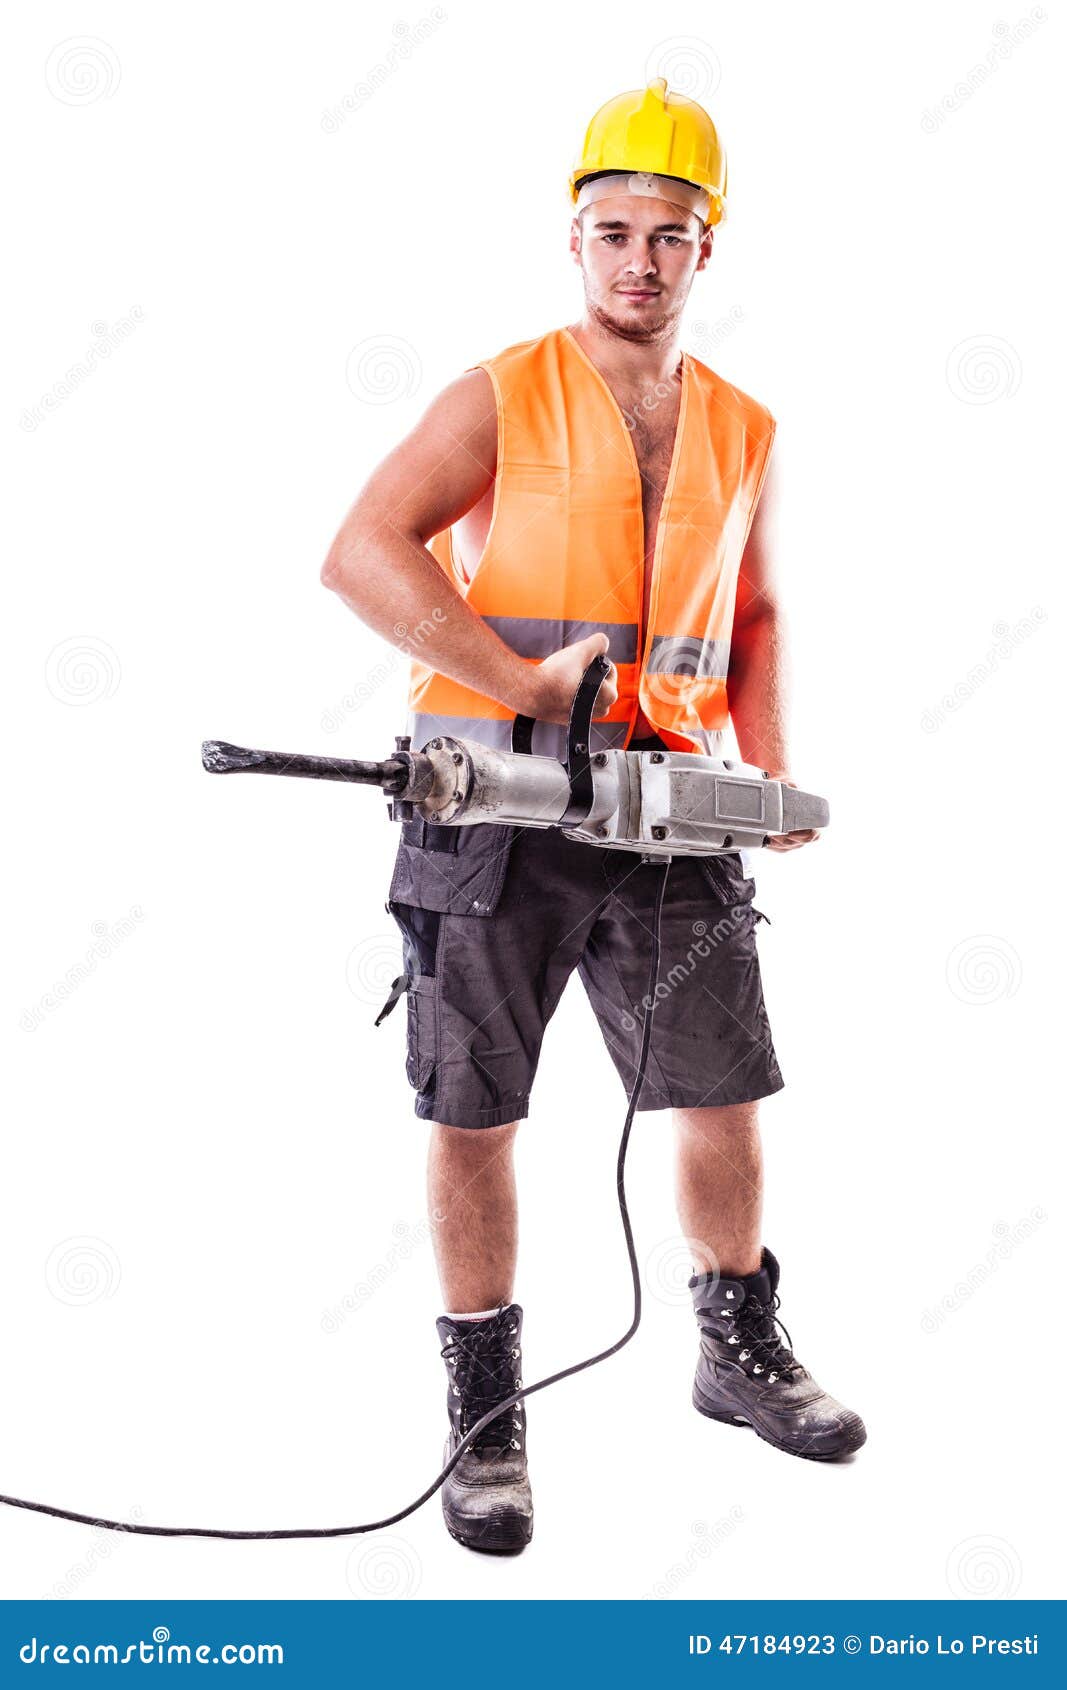 holding-jackhammer-young-road-worker-wearing-hardhat-visibility-vest-isolated-over-white-background-47184923.jpg